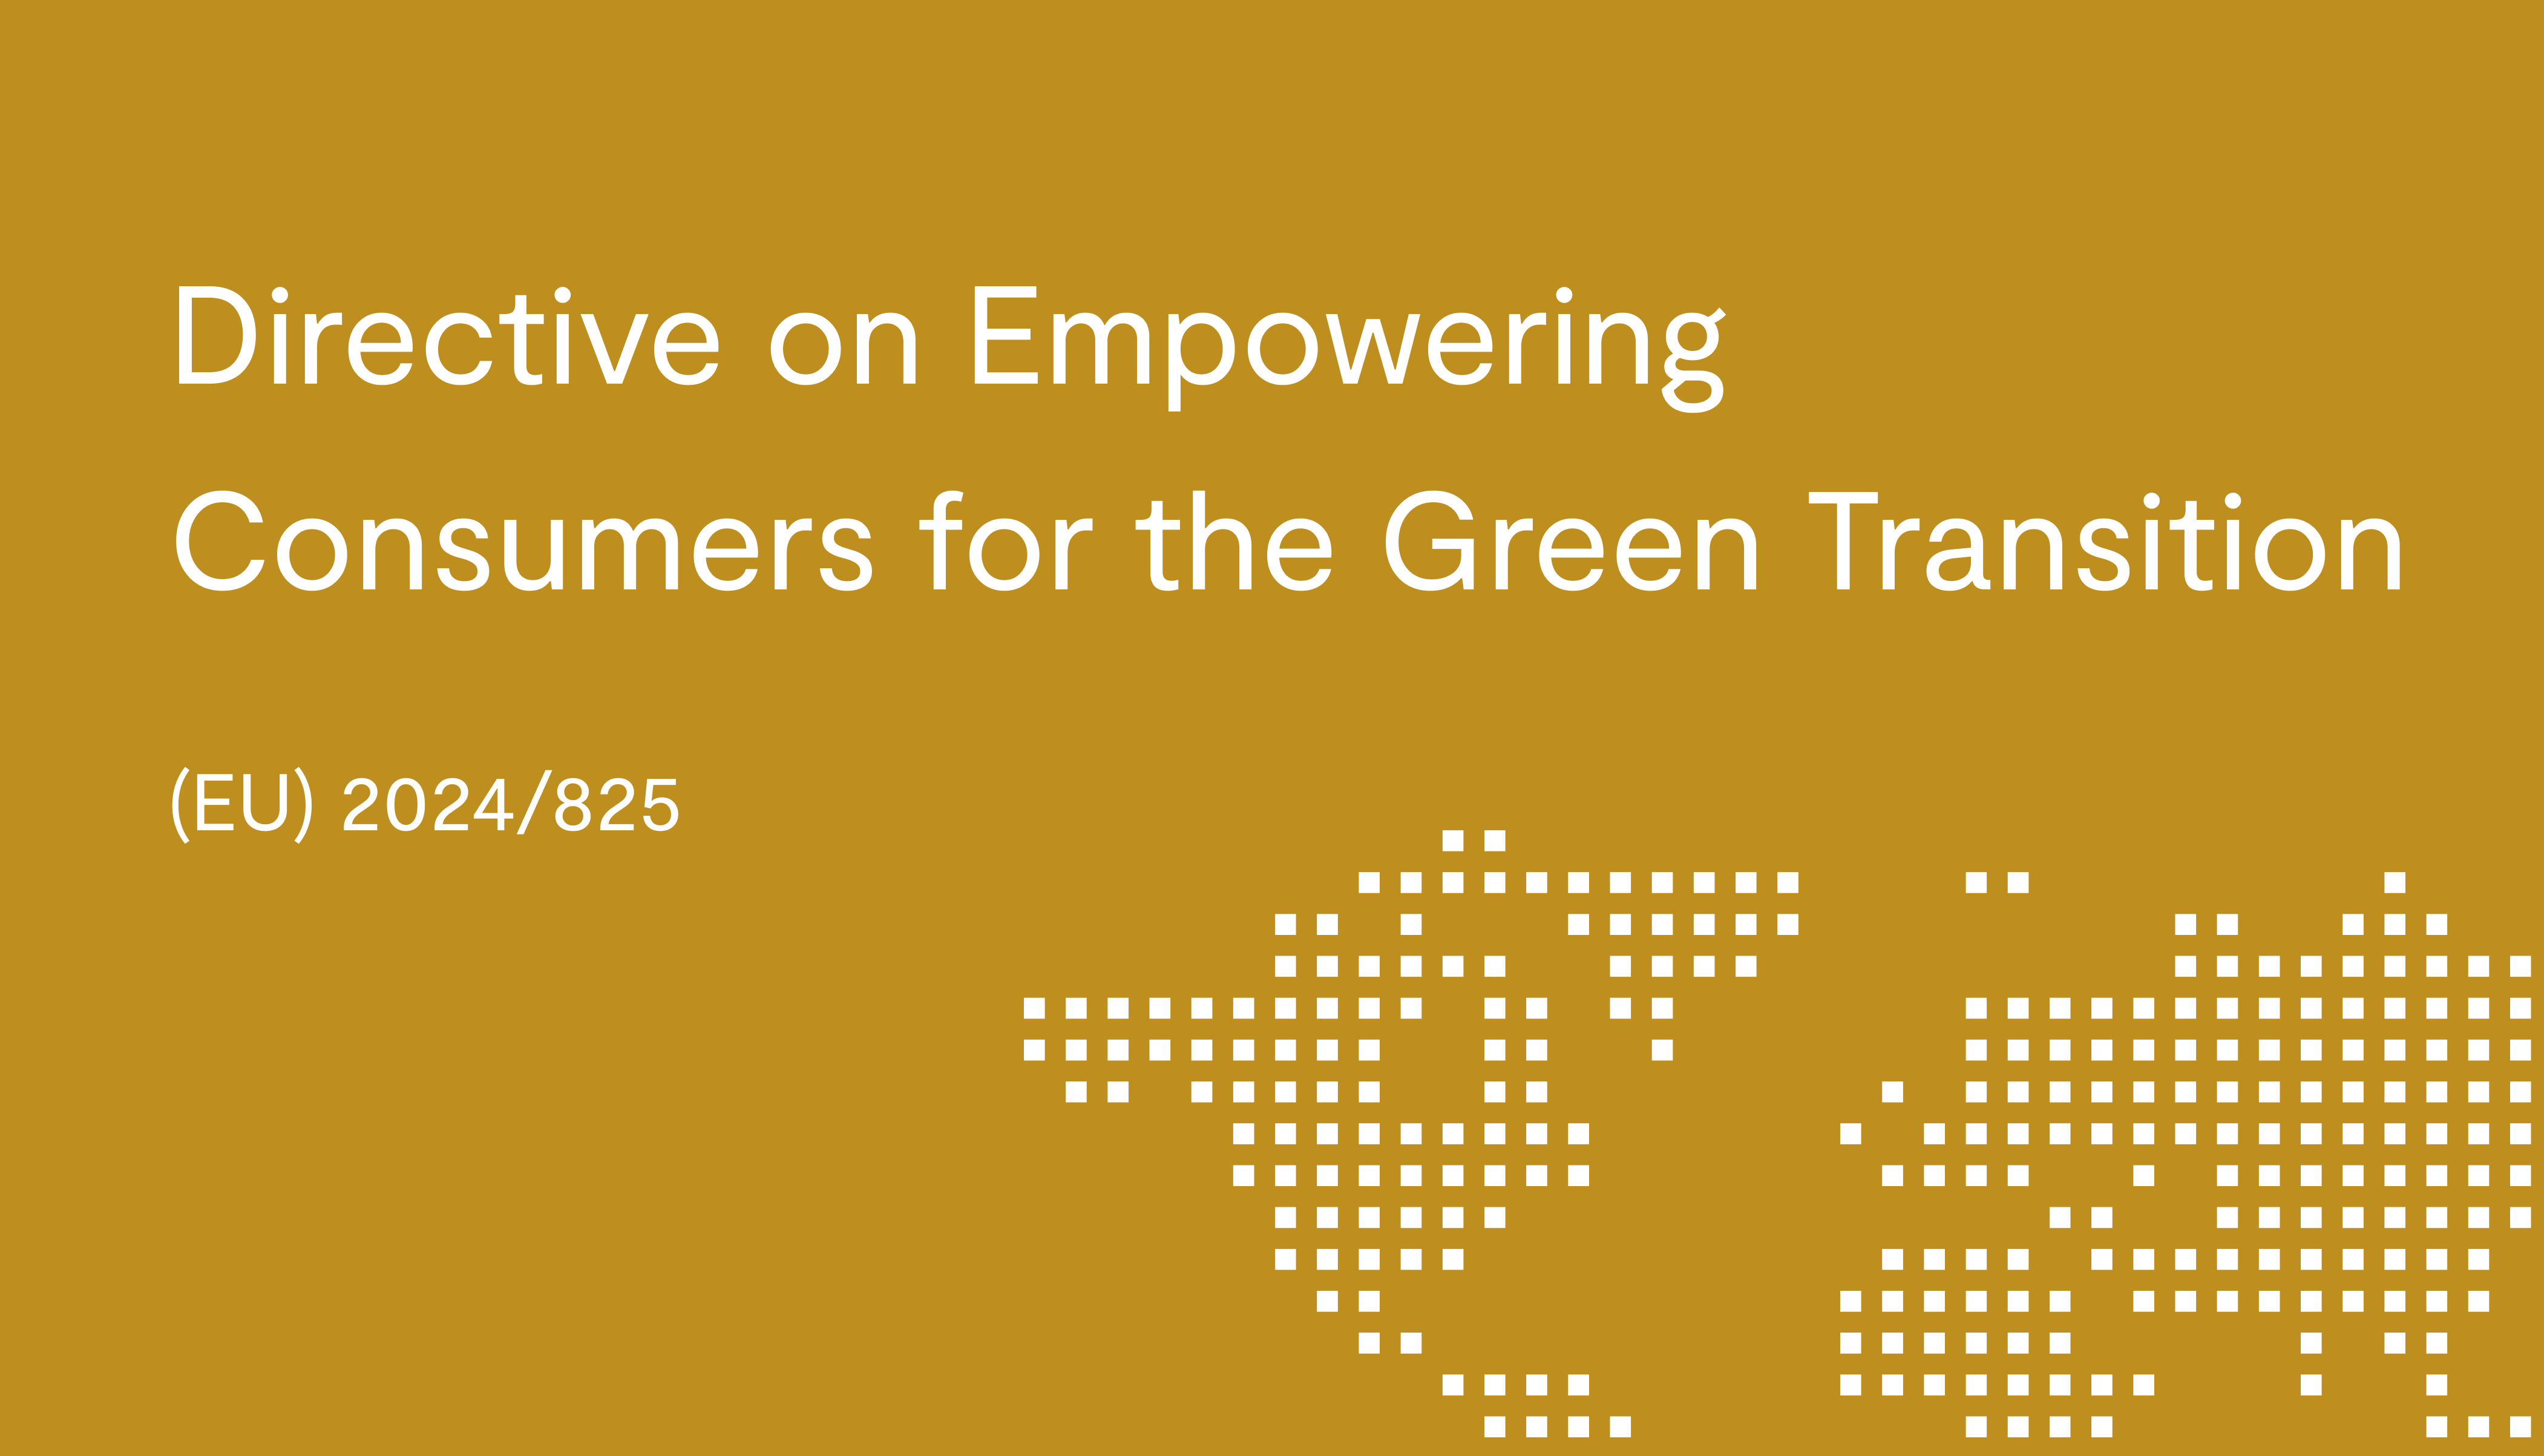 Directive on Empowering Consumers for the Green Transition ((EU) 2024/825)